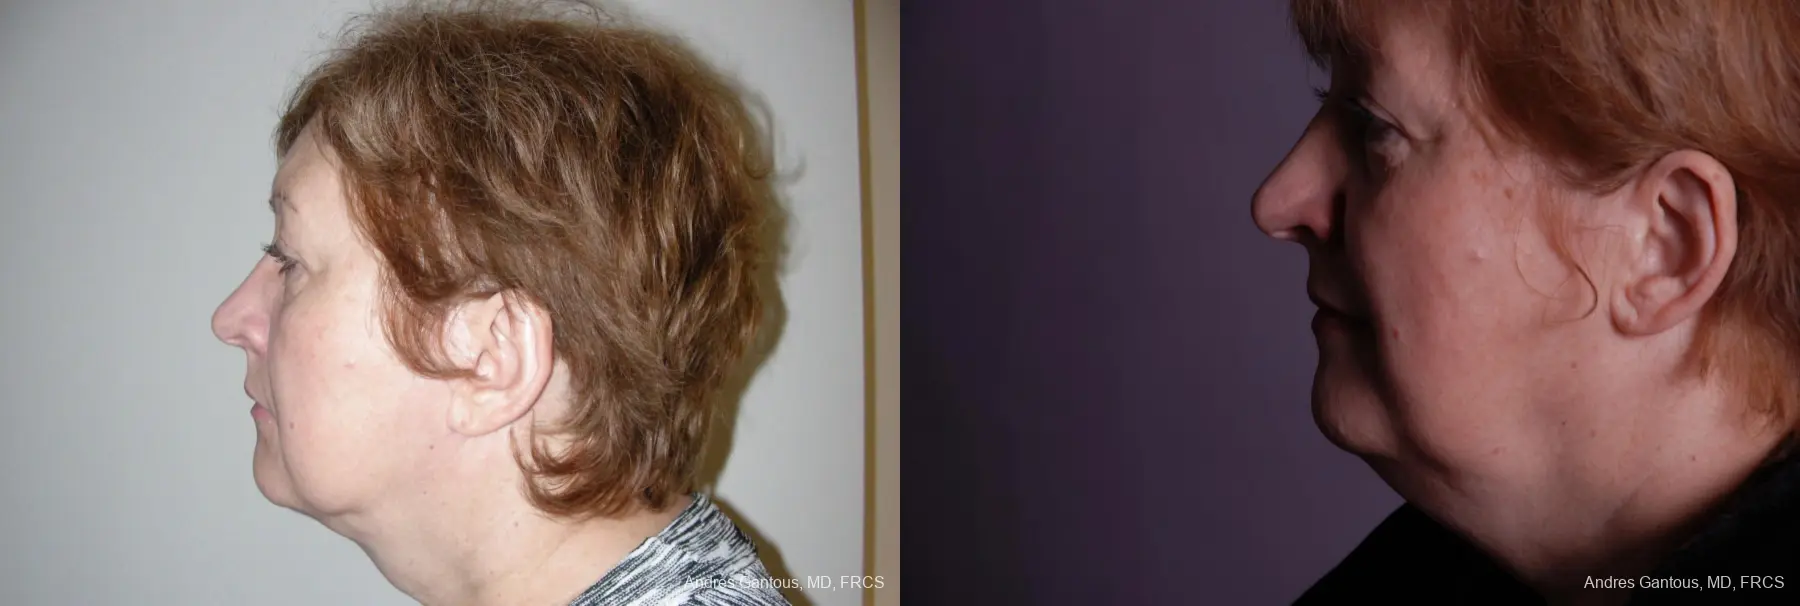 Facelift & Neck Lift: Patient 9 - Before and After 5